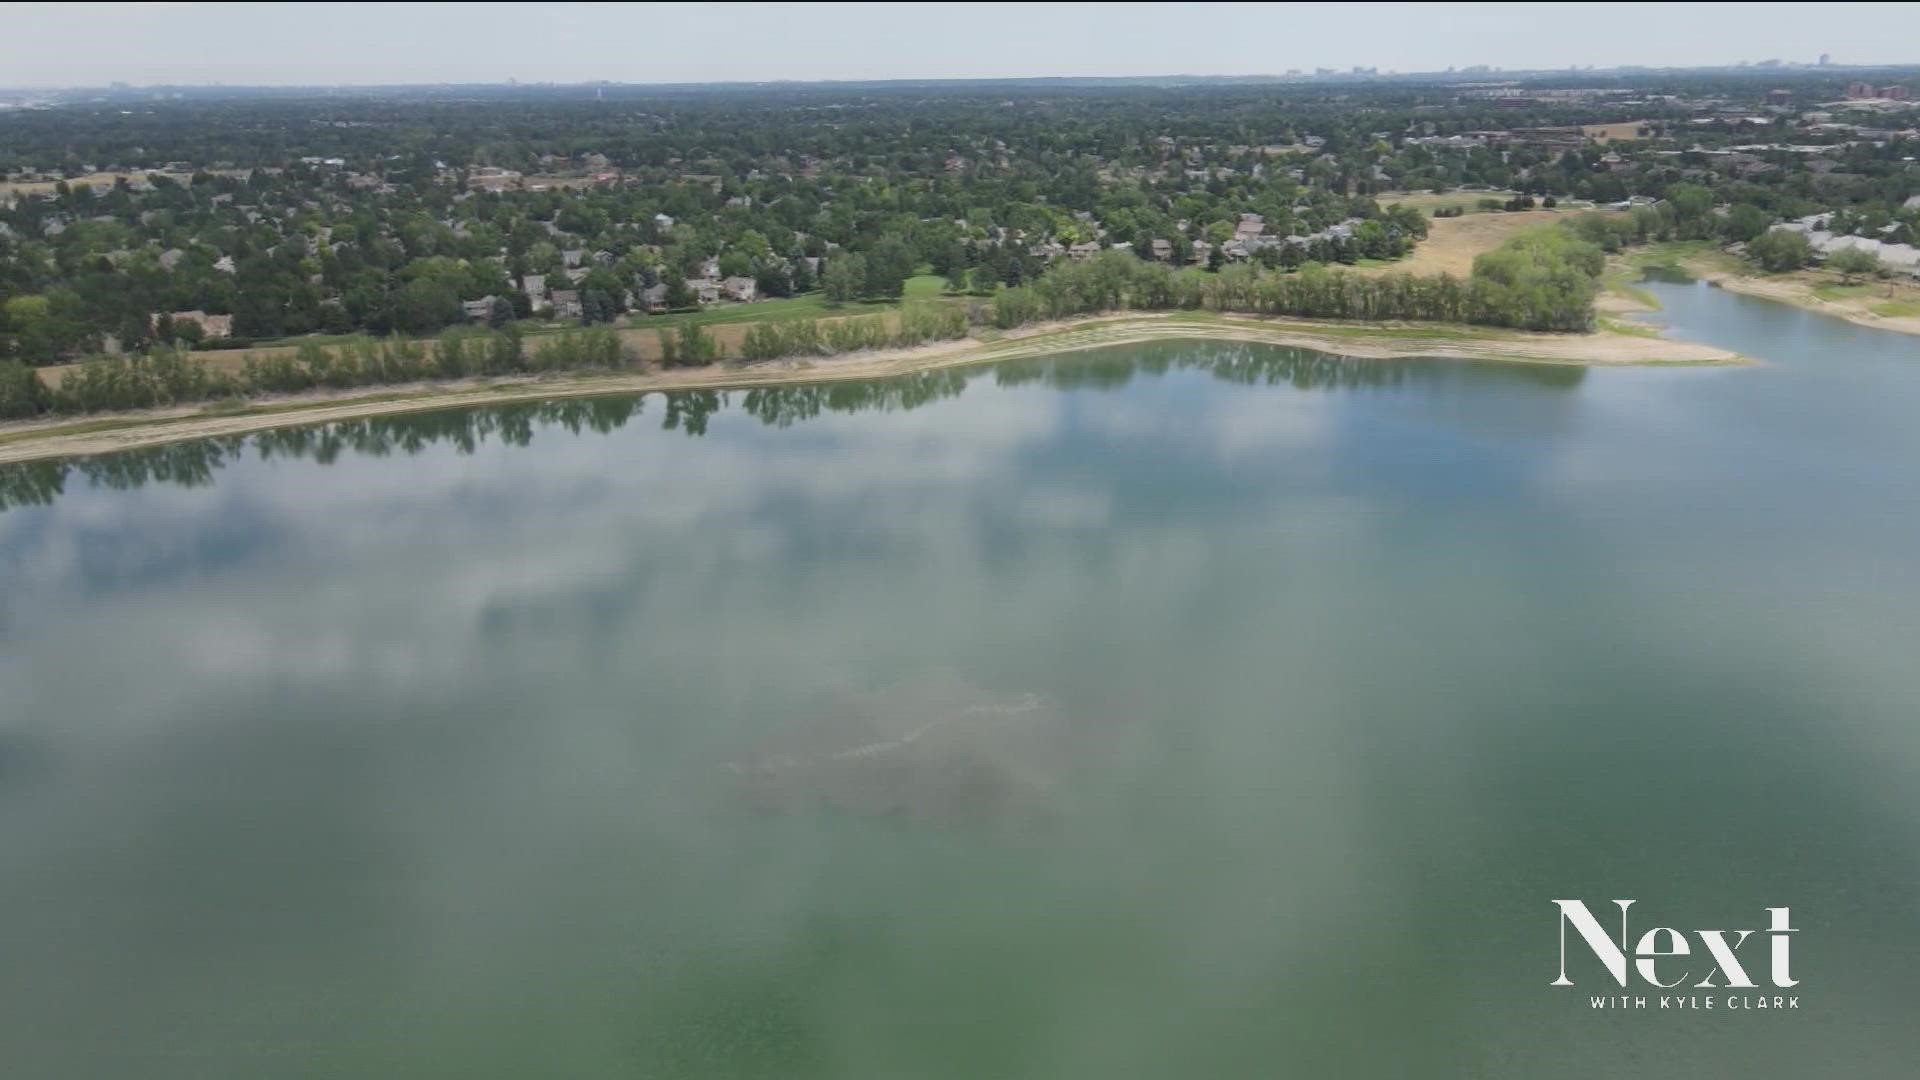 It's algae, the same kind that afflicted Denver's water about a month ago. Don't worry, it's not permanent.